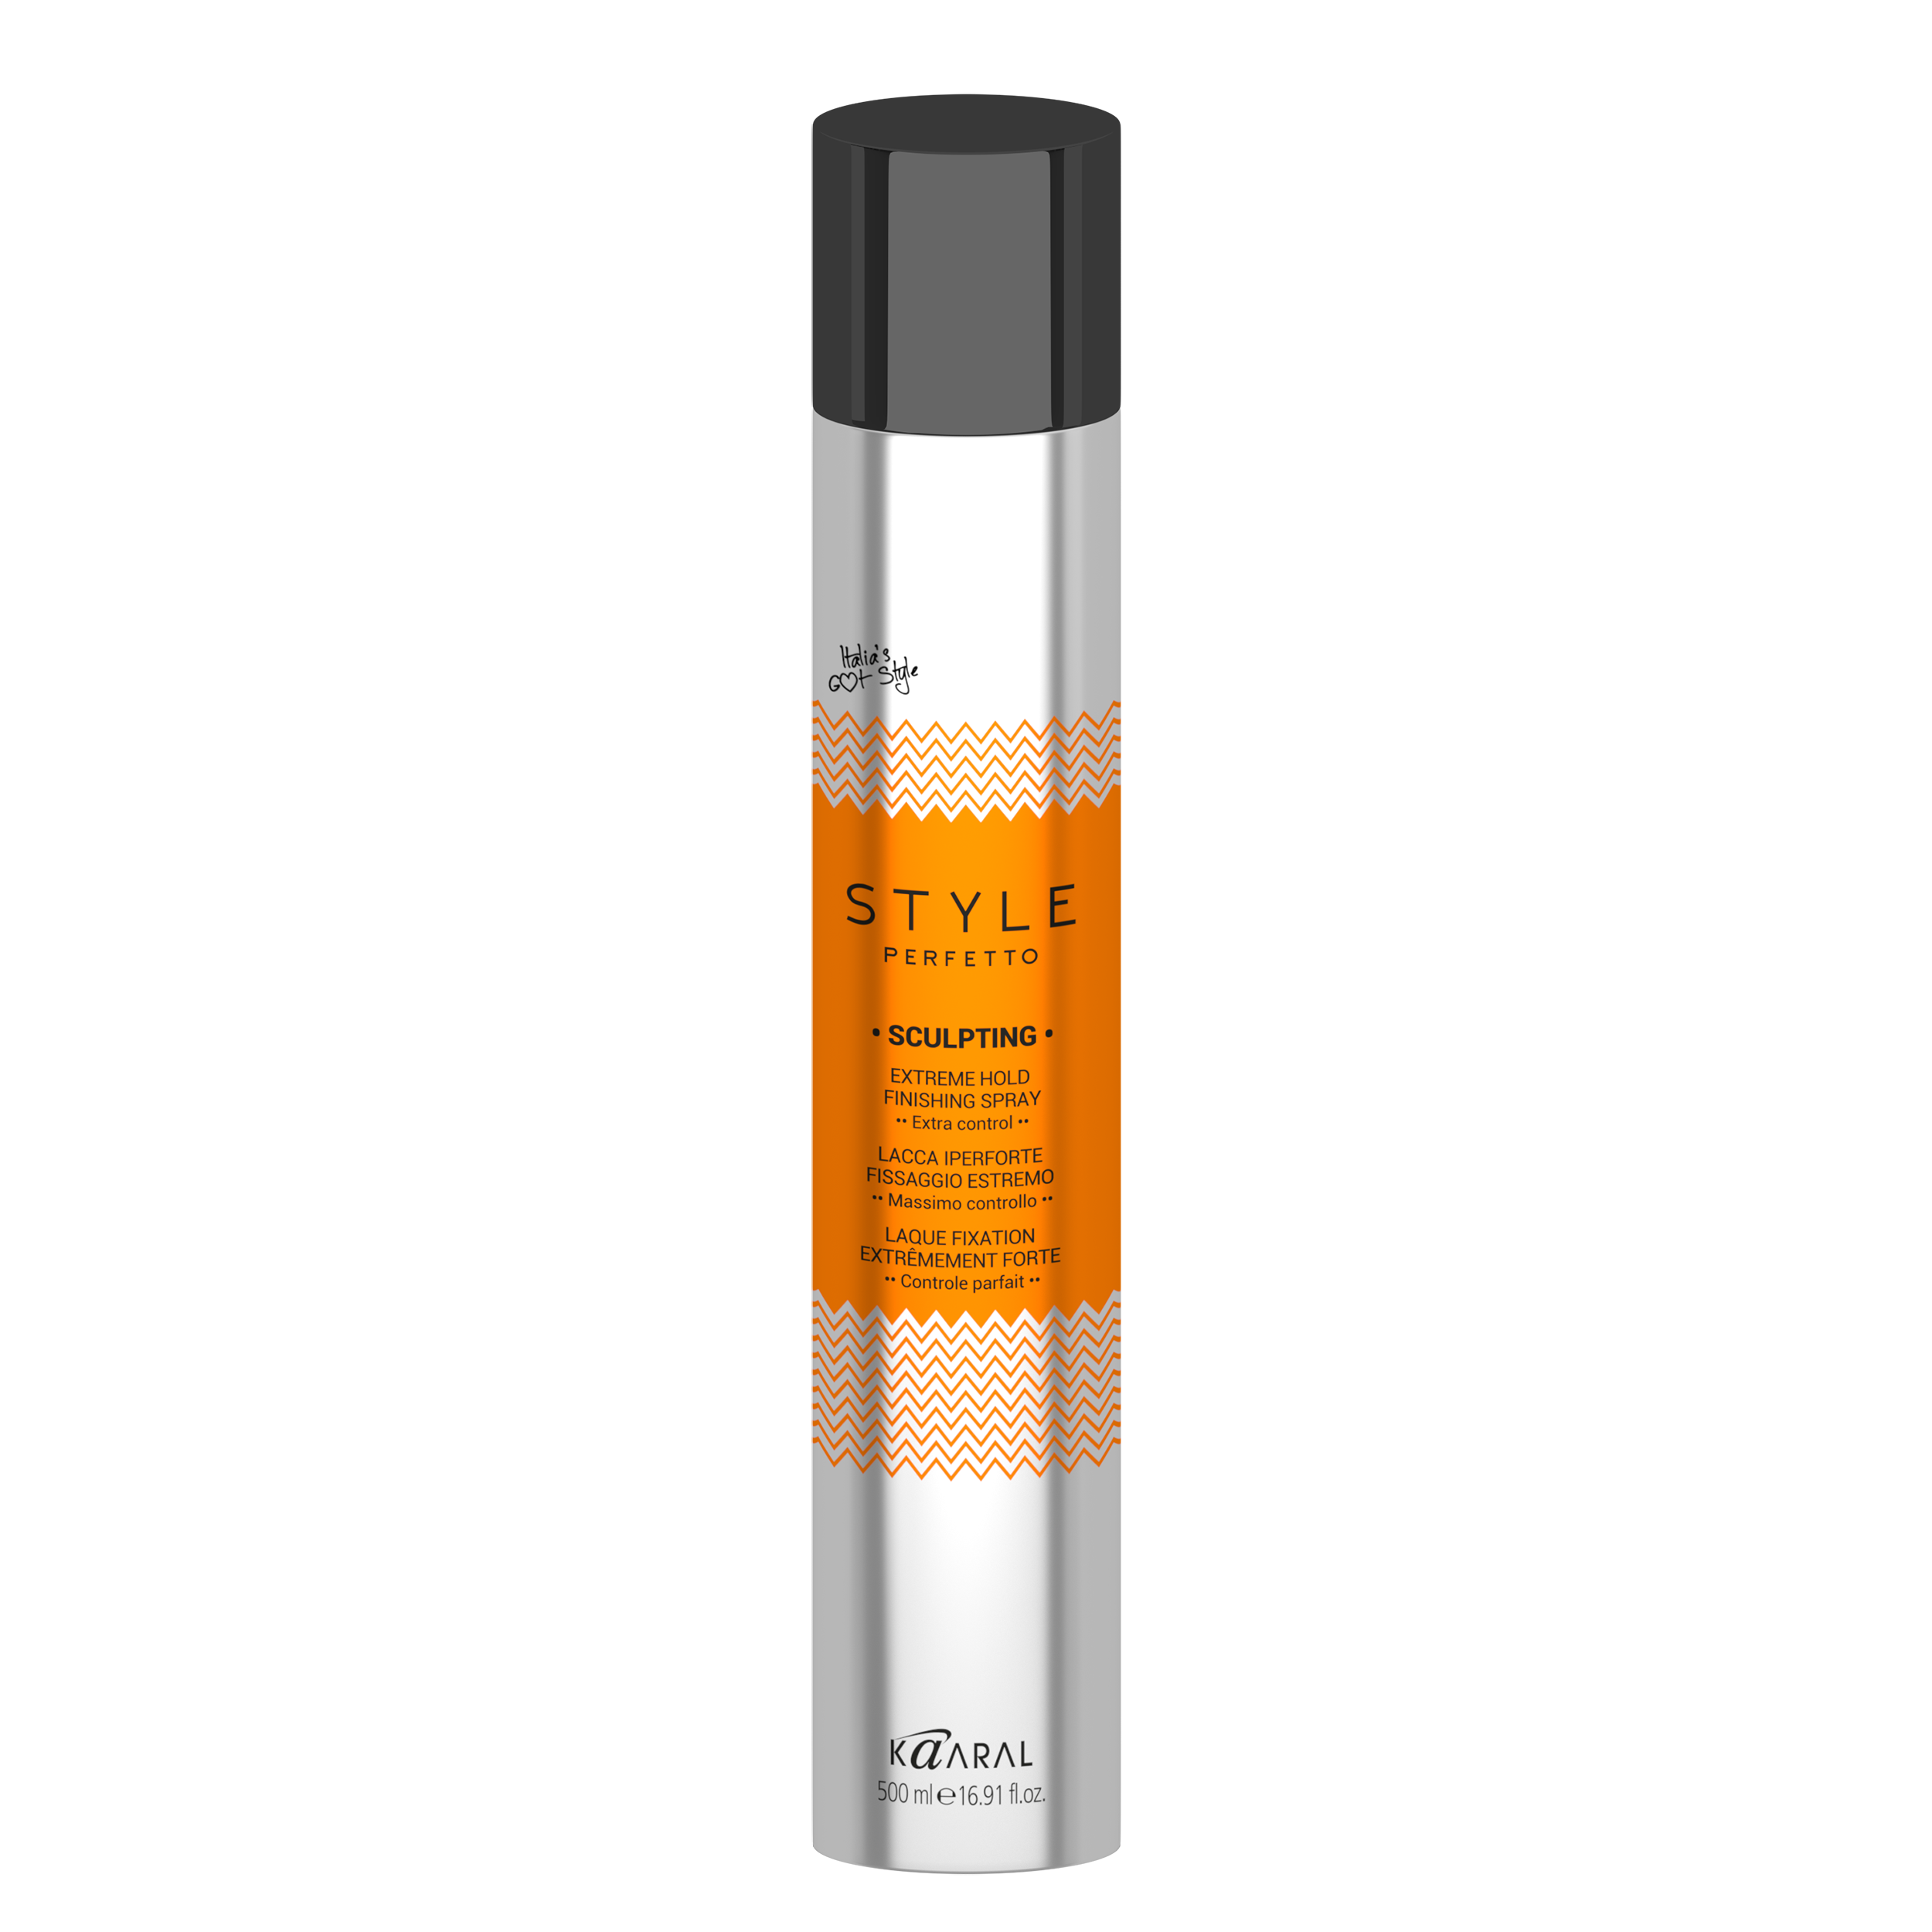 Kaaral - Style Perfetto Sculpting Extreme Hold Finishing Spray - Creata Beauty - Professional Beauty Products